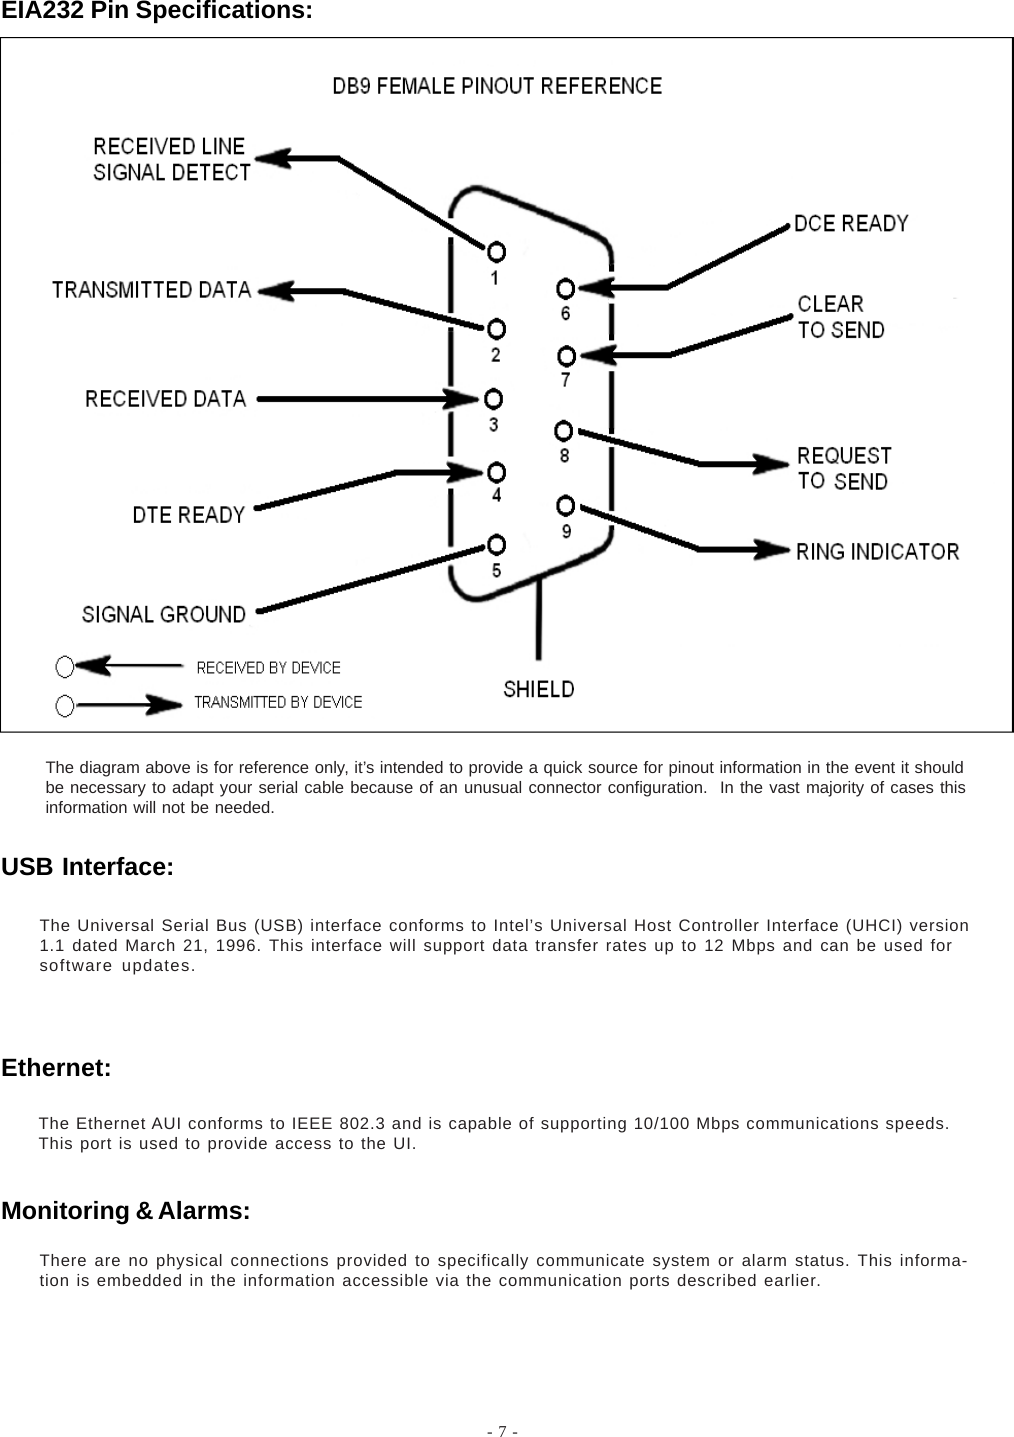 - 7 -EIA232 Pin Specifications:The diagram above is for reference only, it’s intended to provide a quick source for pinout information in the event it shouldbe necessary to adapt your serial cable because of an unusual connector configuration.  In the vast majority of cases thisinformation will not be needed.There are no physical connections provided to specifically communicate system or alarm status. This informa-tion is embedded in the information accessible via the communication ports described earlier.The Universal Serial Bus (USB) interface conforms to Intel’s Universal Host Controller Interface (UHCI) version1.1 dated March 21, 1996. This interface will support data transfer rates up to 12 Mbps and can be used forsoftware updates.The Ethernet AUI conforms to IEEE 802.3 and is capable of supporting 10/100 Mbps communications speeds.This port is used to provide access to the UI.USB Interface:Ethernet:Monitoring &amp; Alarms: